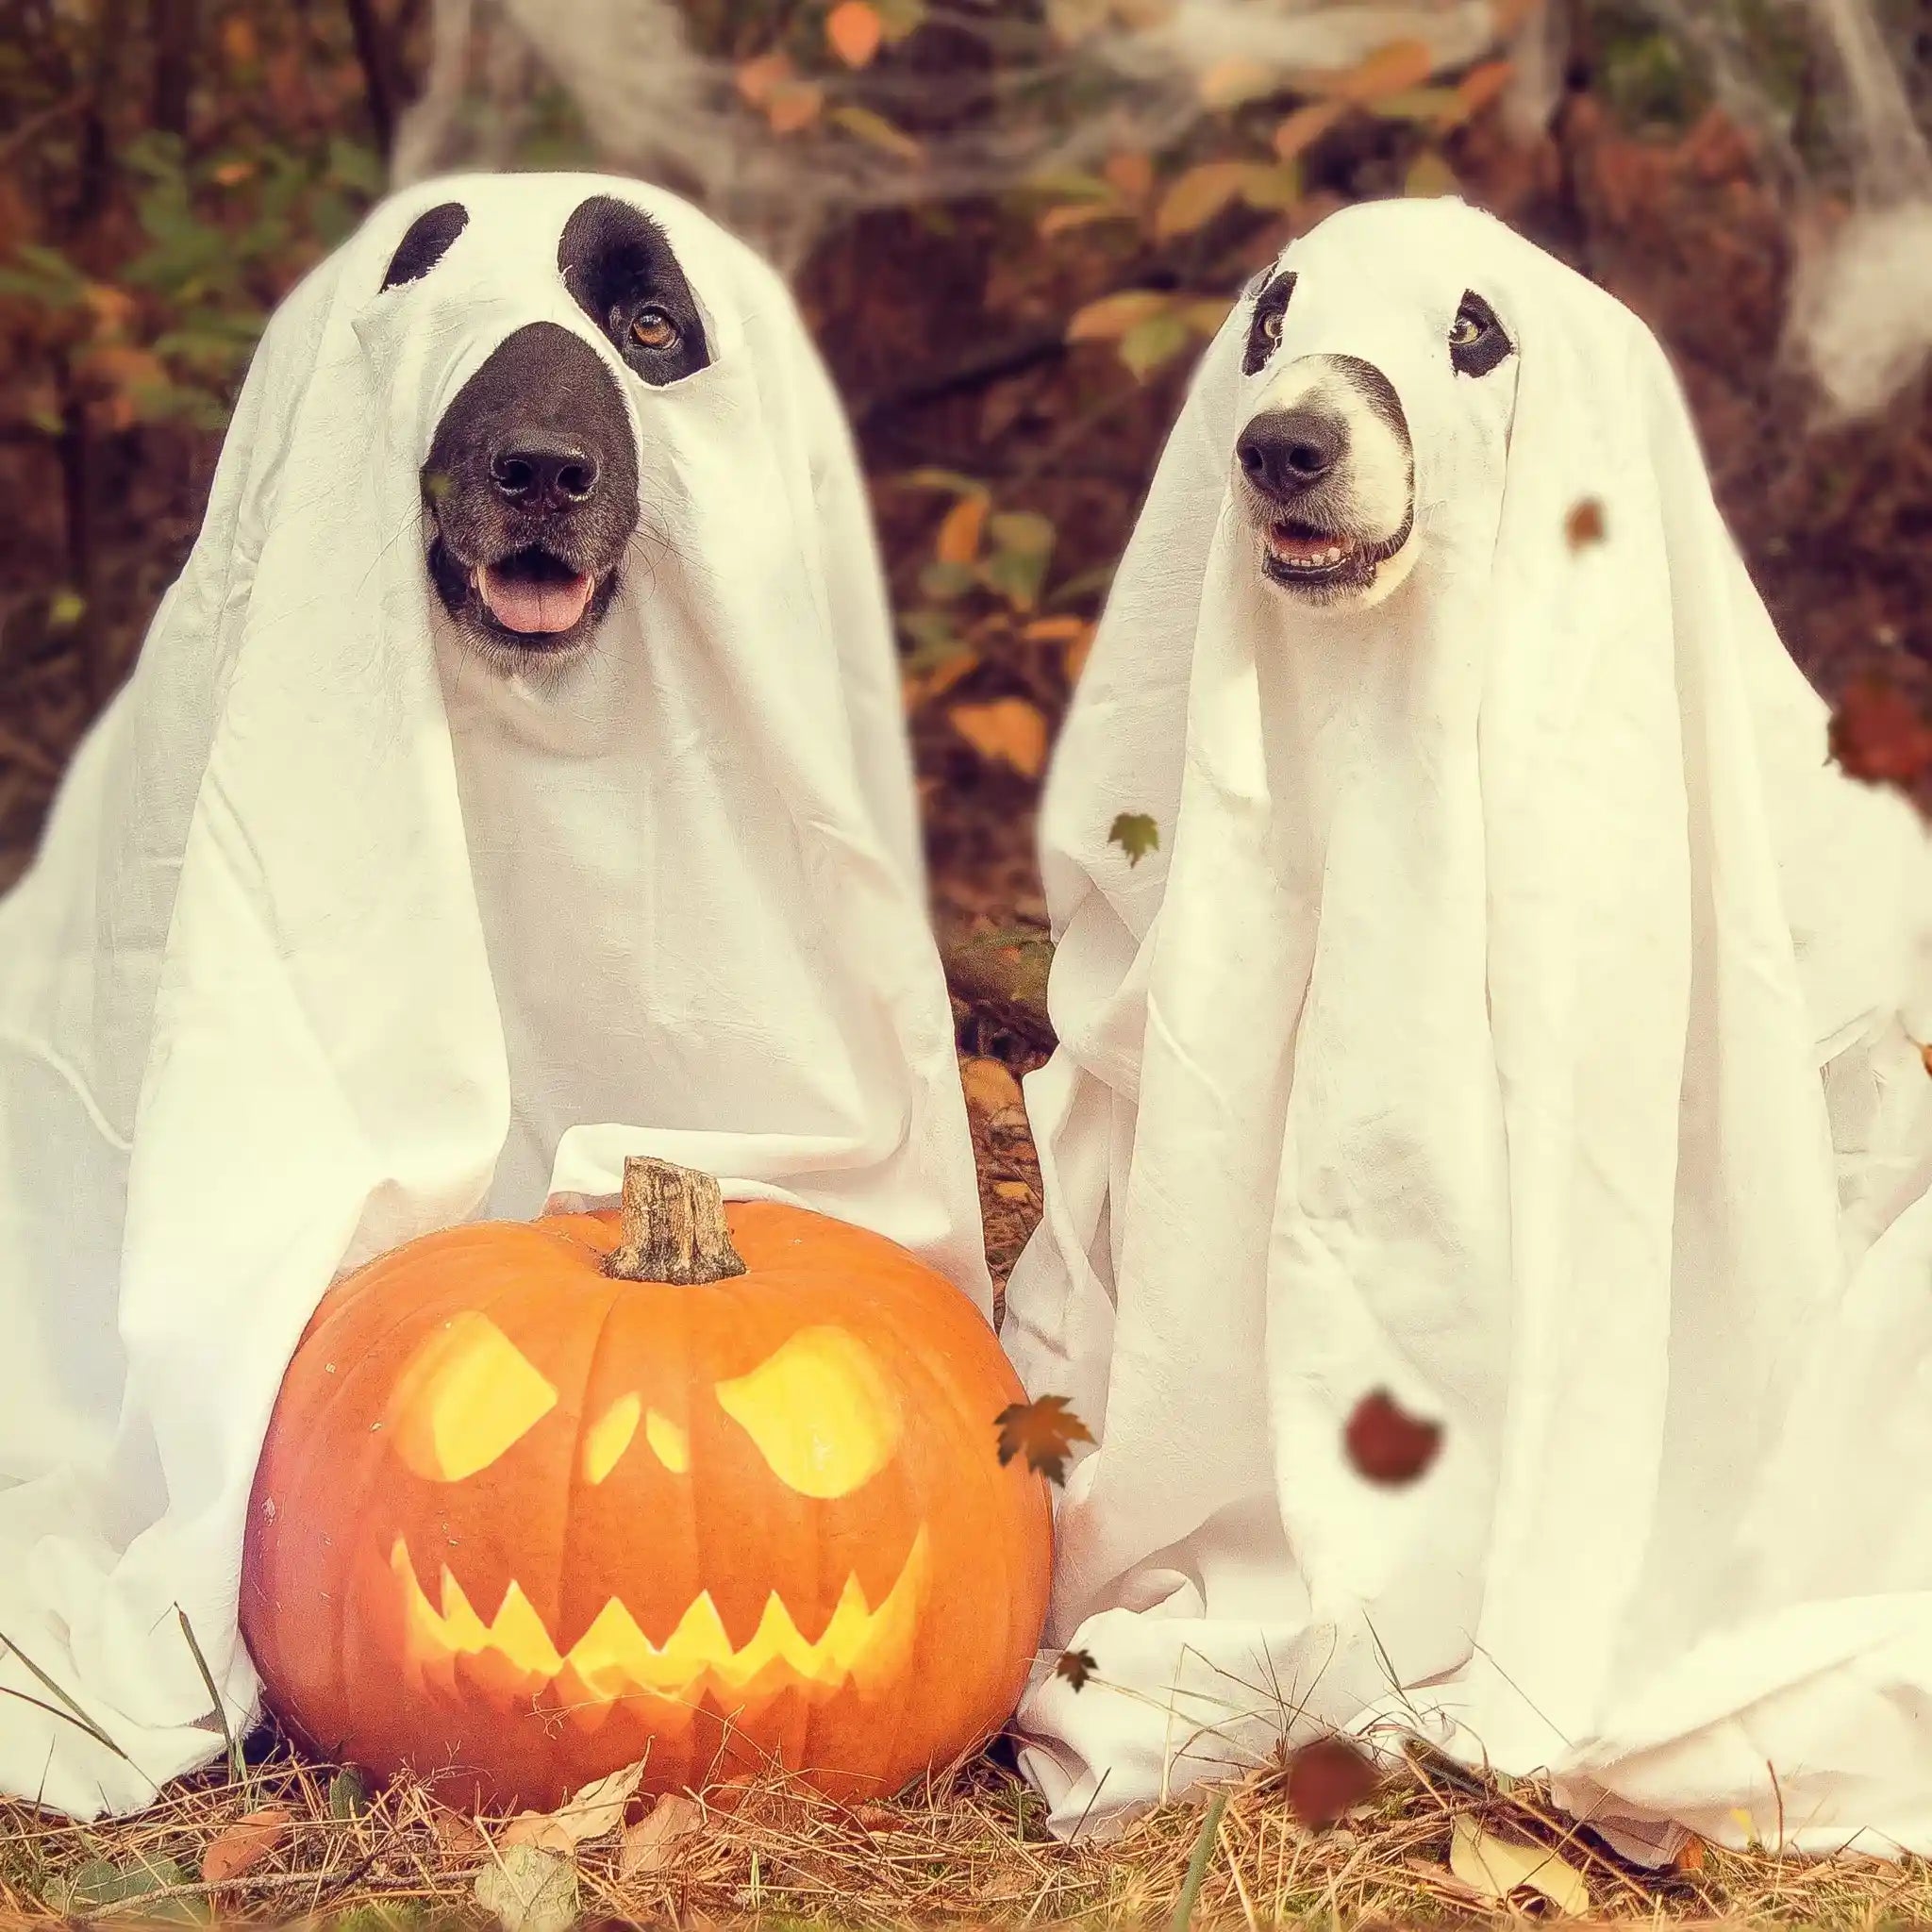 Dogs staying safe on Halloween.